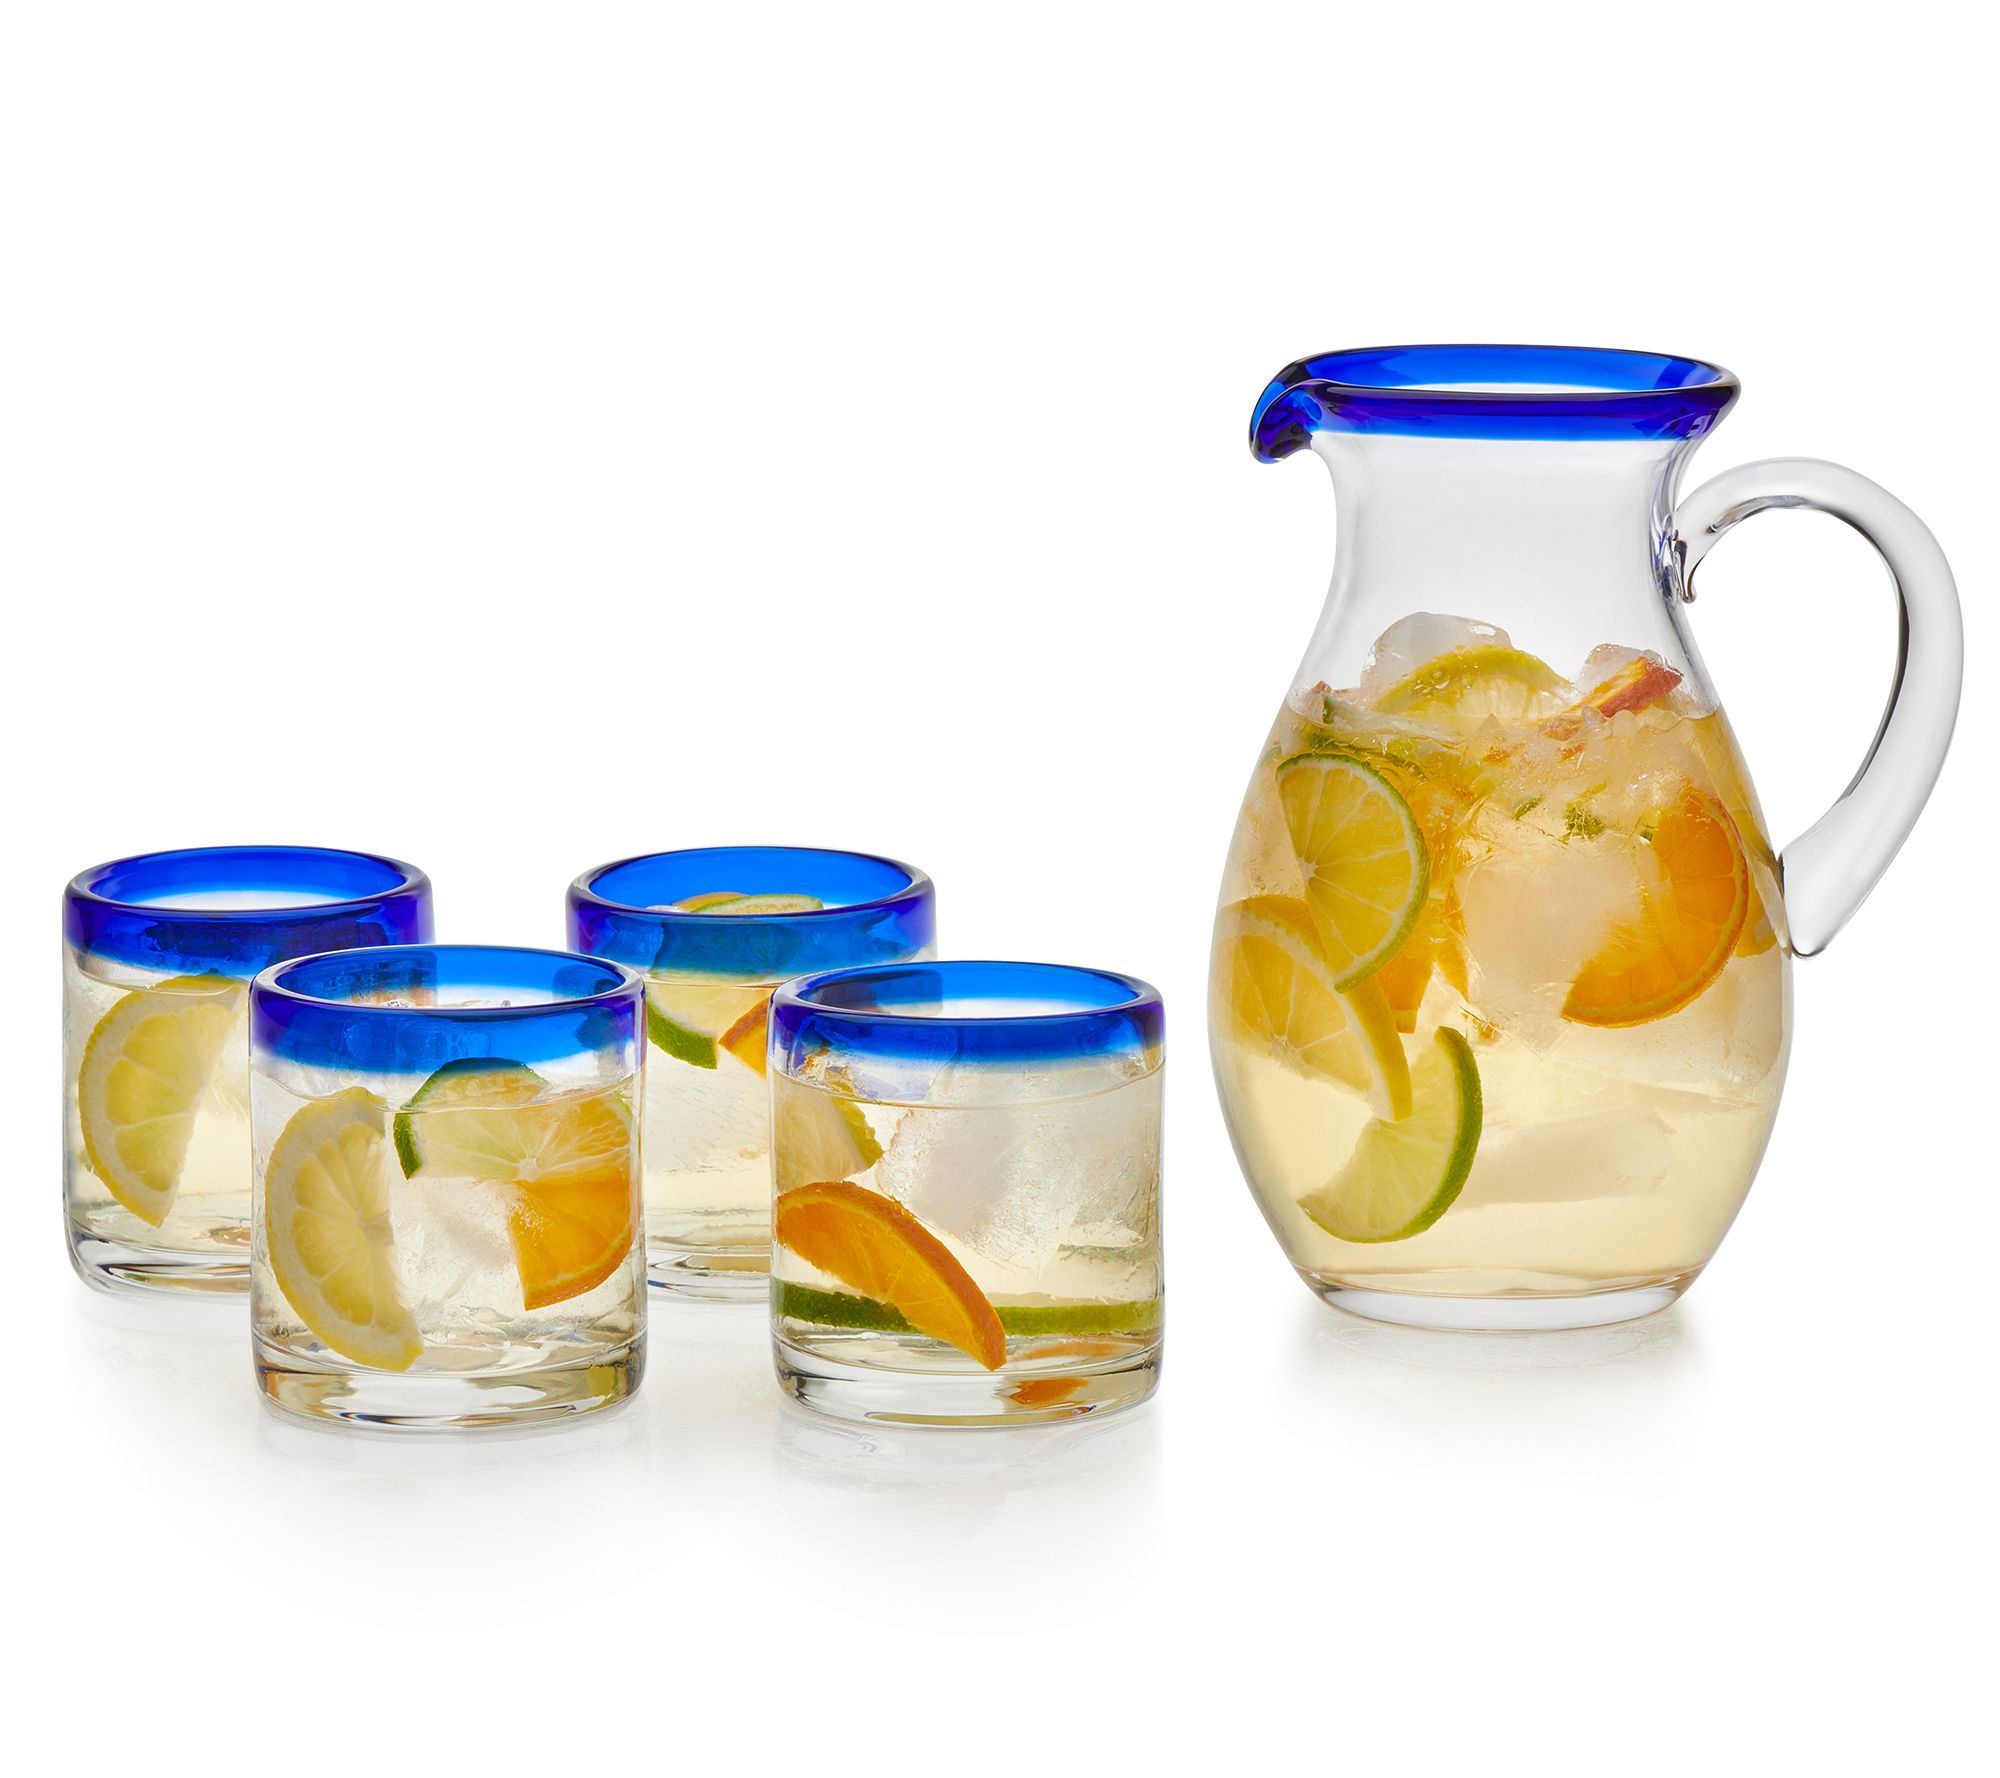 Small Glass Pitchers - Fine table accessories